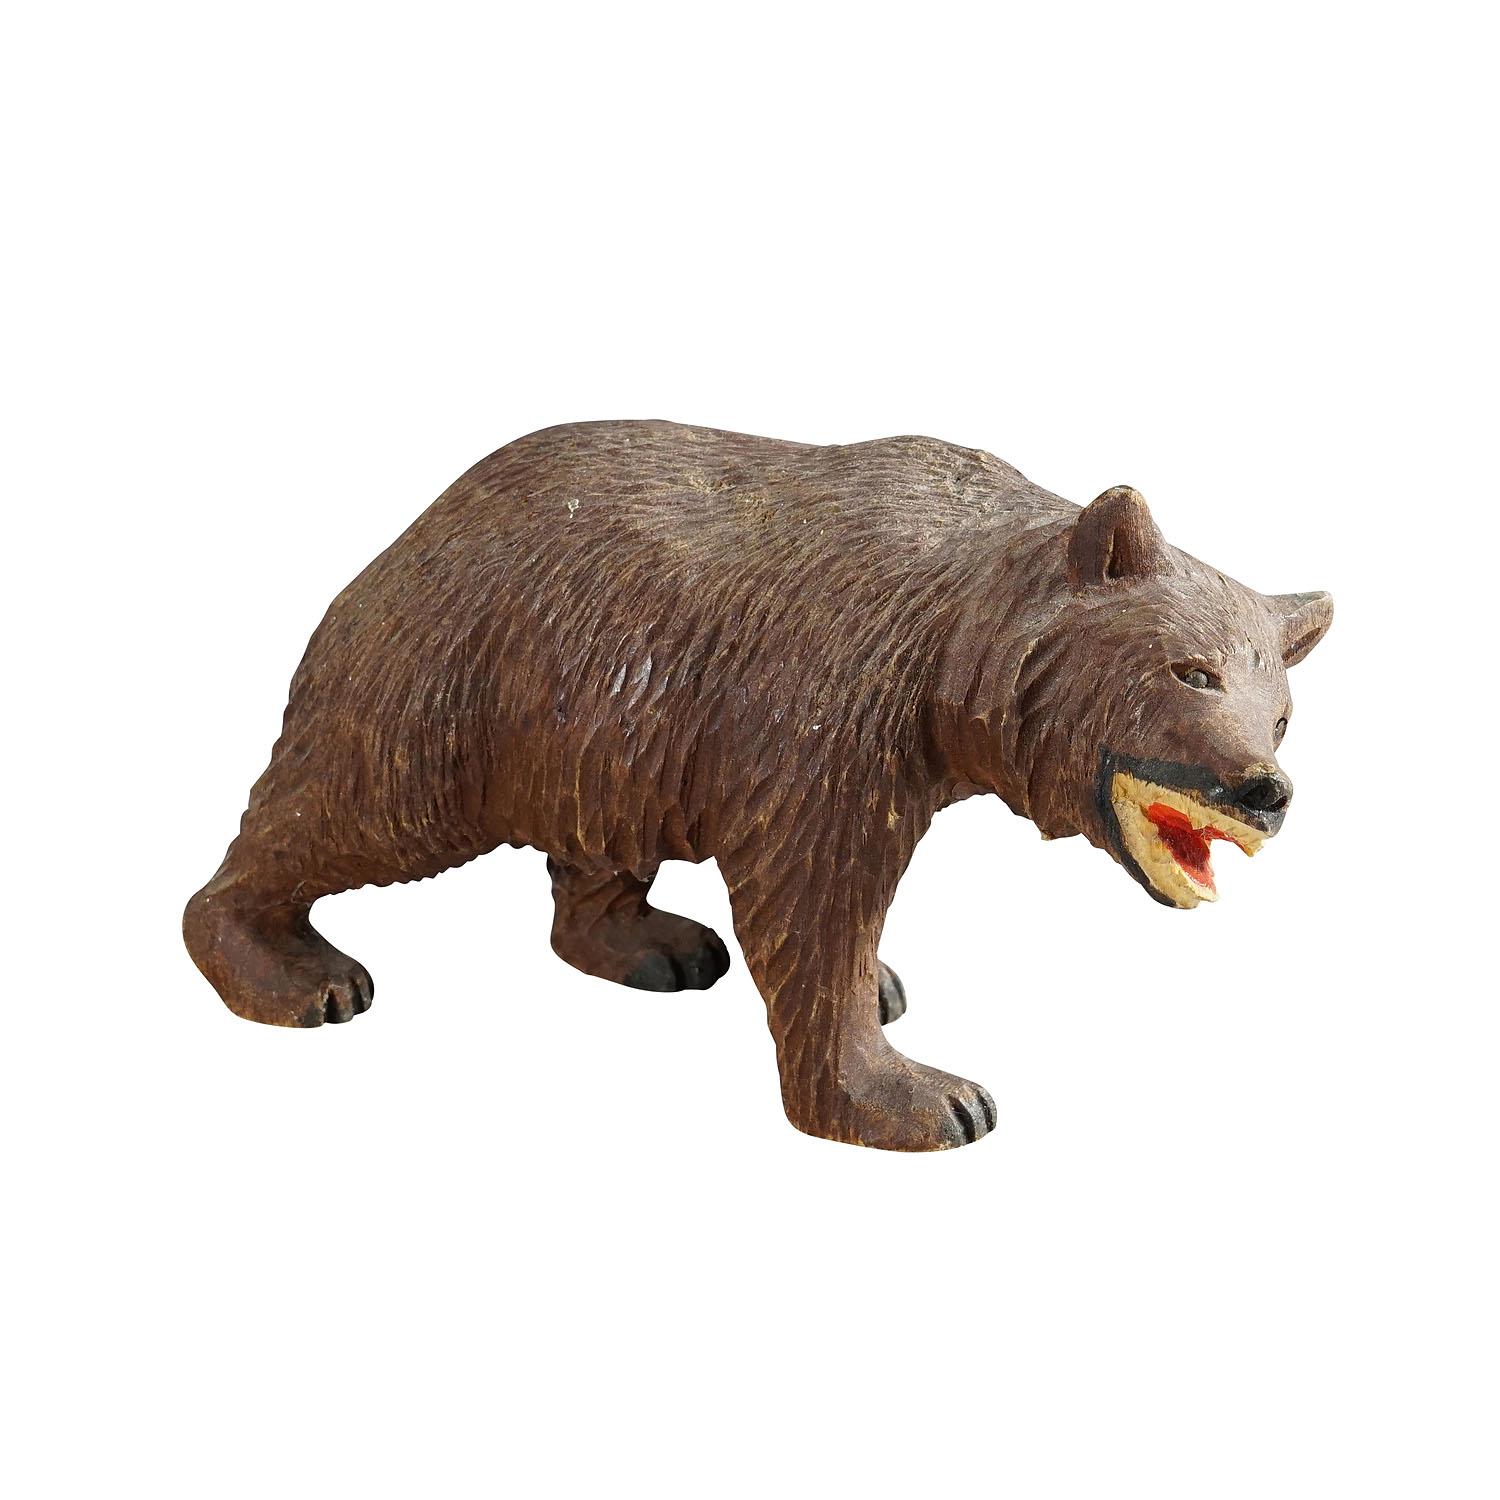 Vintage Wooden Strolling Bear Handcarved in Brienz ca. 1950

A vintage statue of a walking bear. Made of lindenwood, finely handcarved with naturalistic details in Brienz, Switzerland ca. 1950. A nice example of the famous Black Forest Woodcarvings